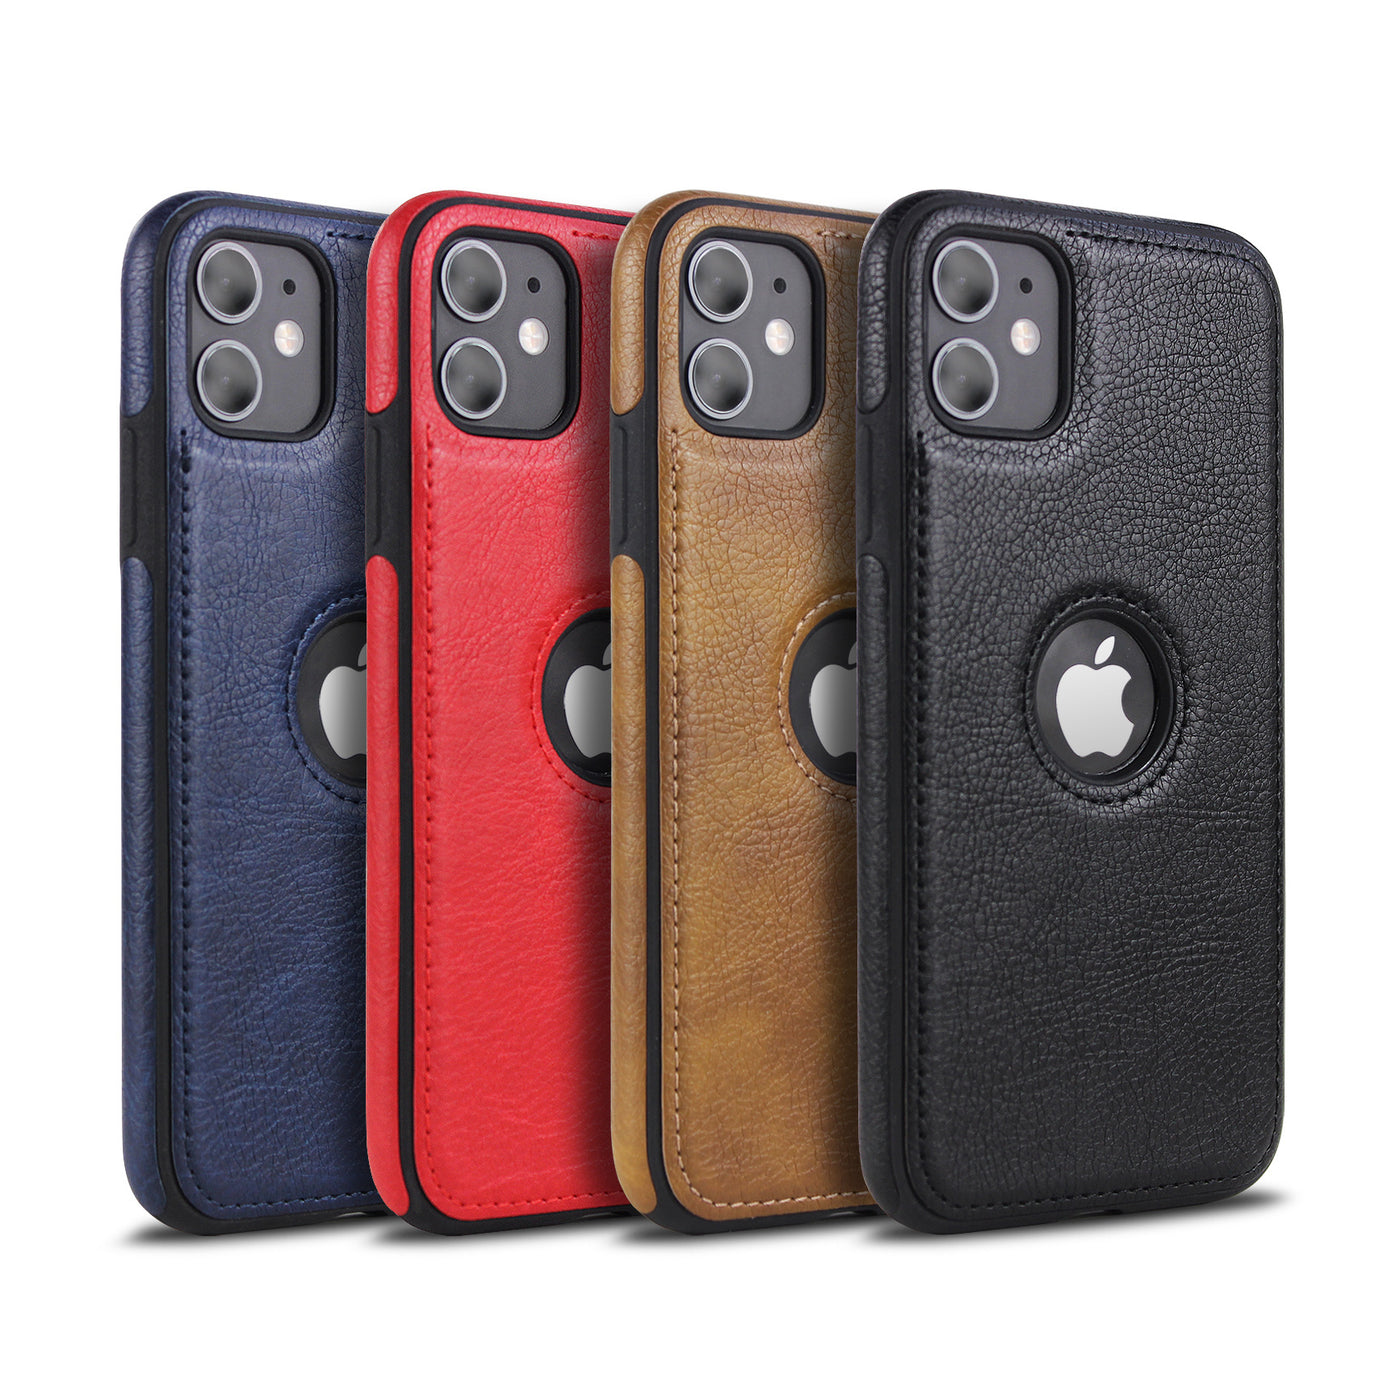 Litchi Leather Style Back Cases And Covers